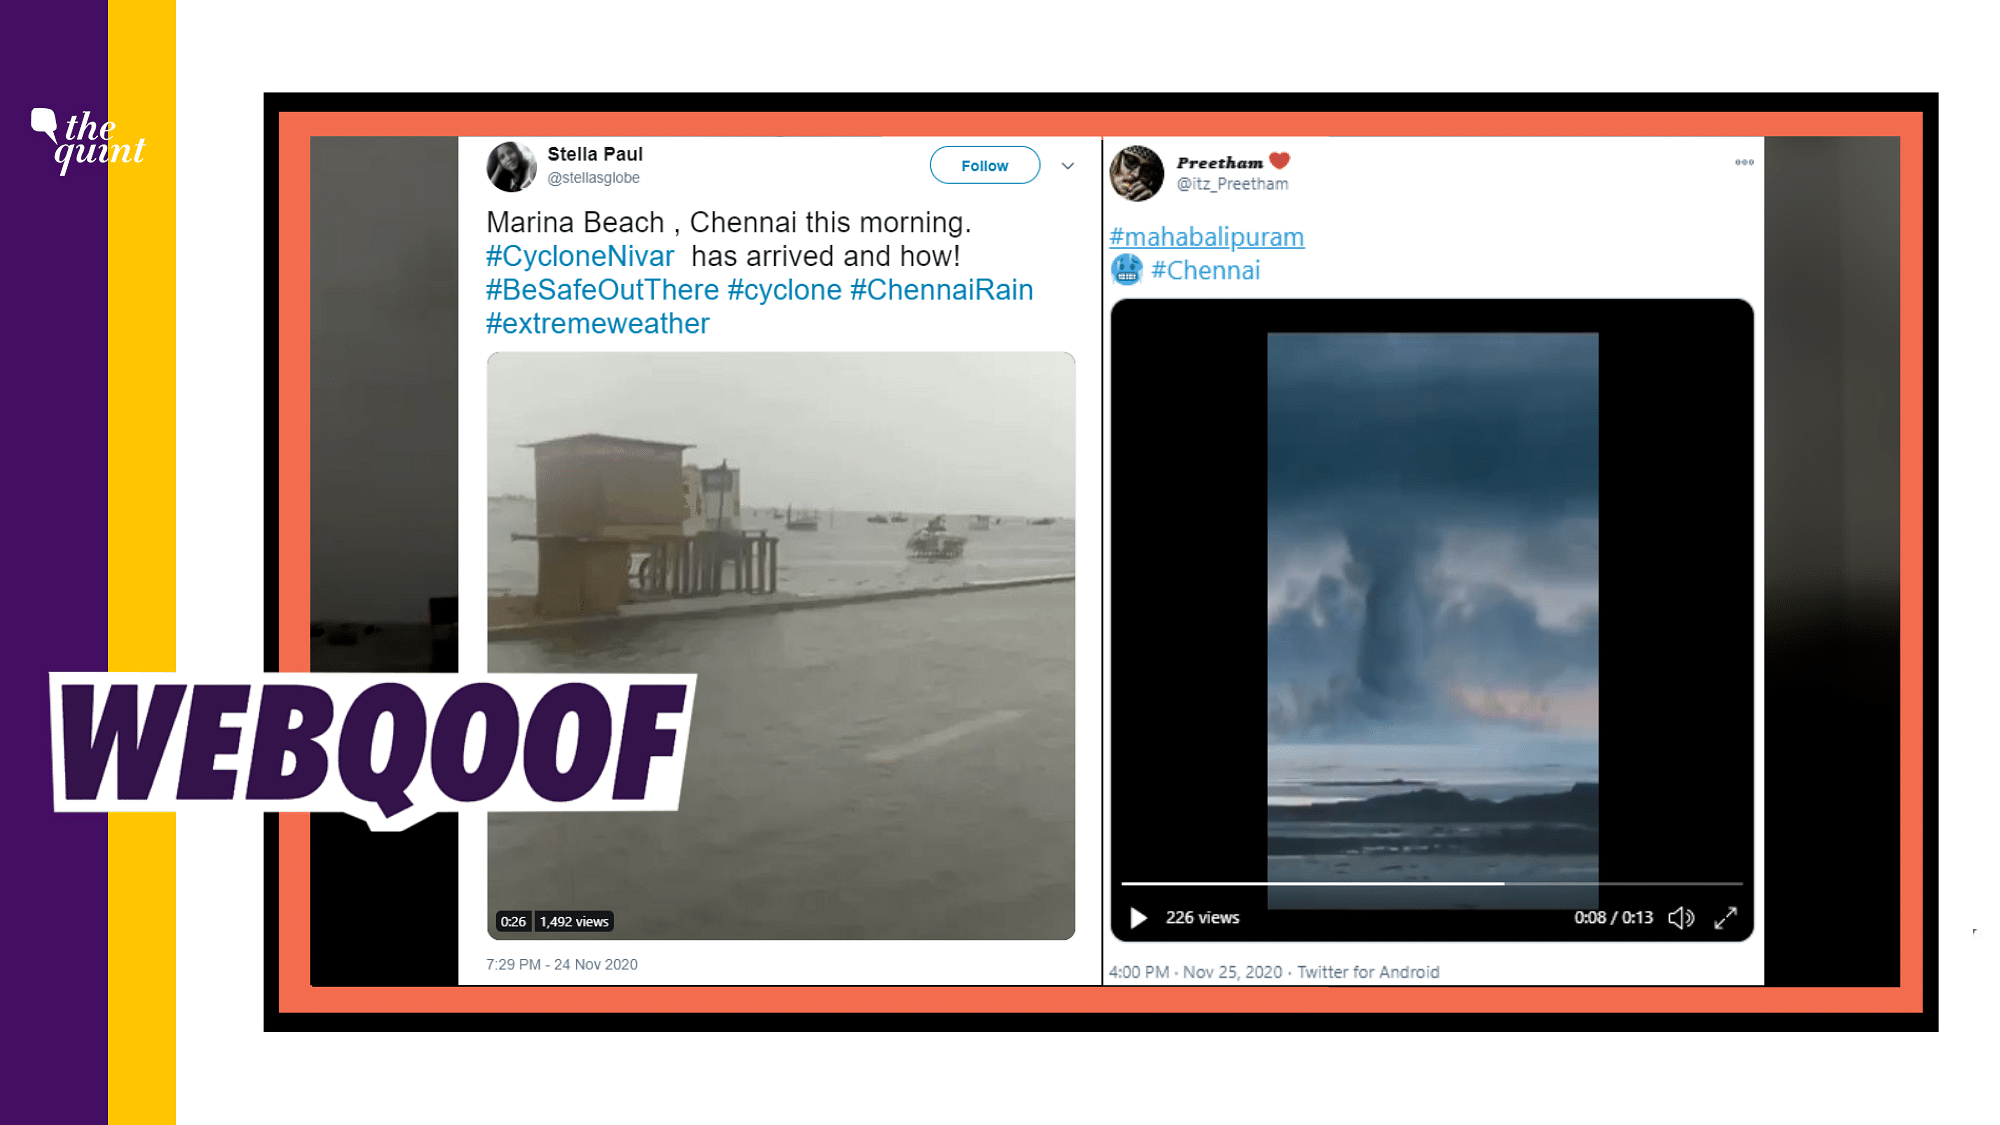 An old video from 2017 and a CGI simulation have been falsely shared as visuals of Cyclone Nivar in Tamil Nadu.